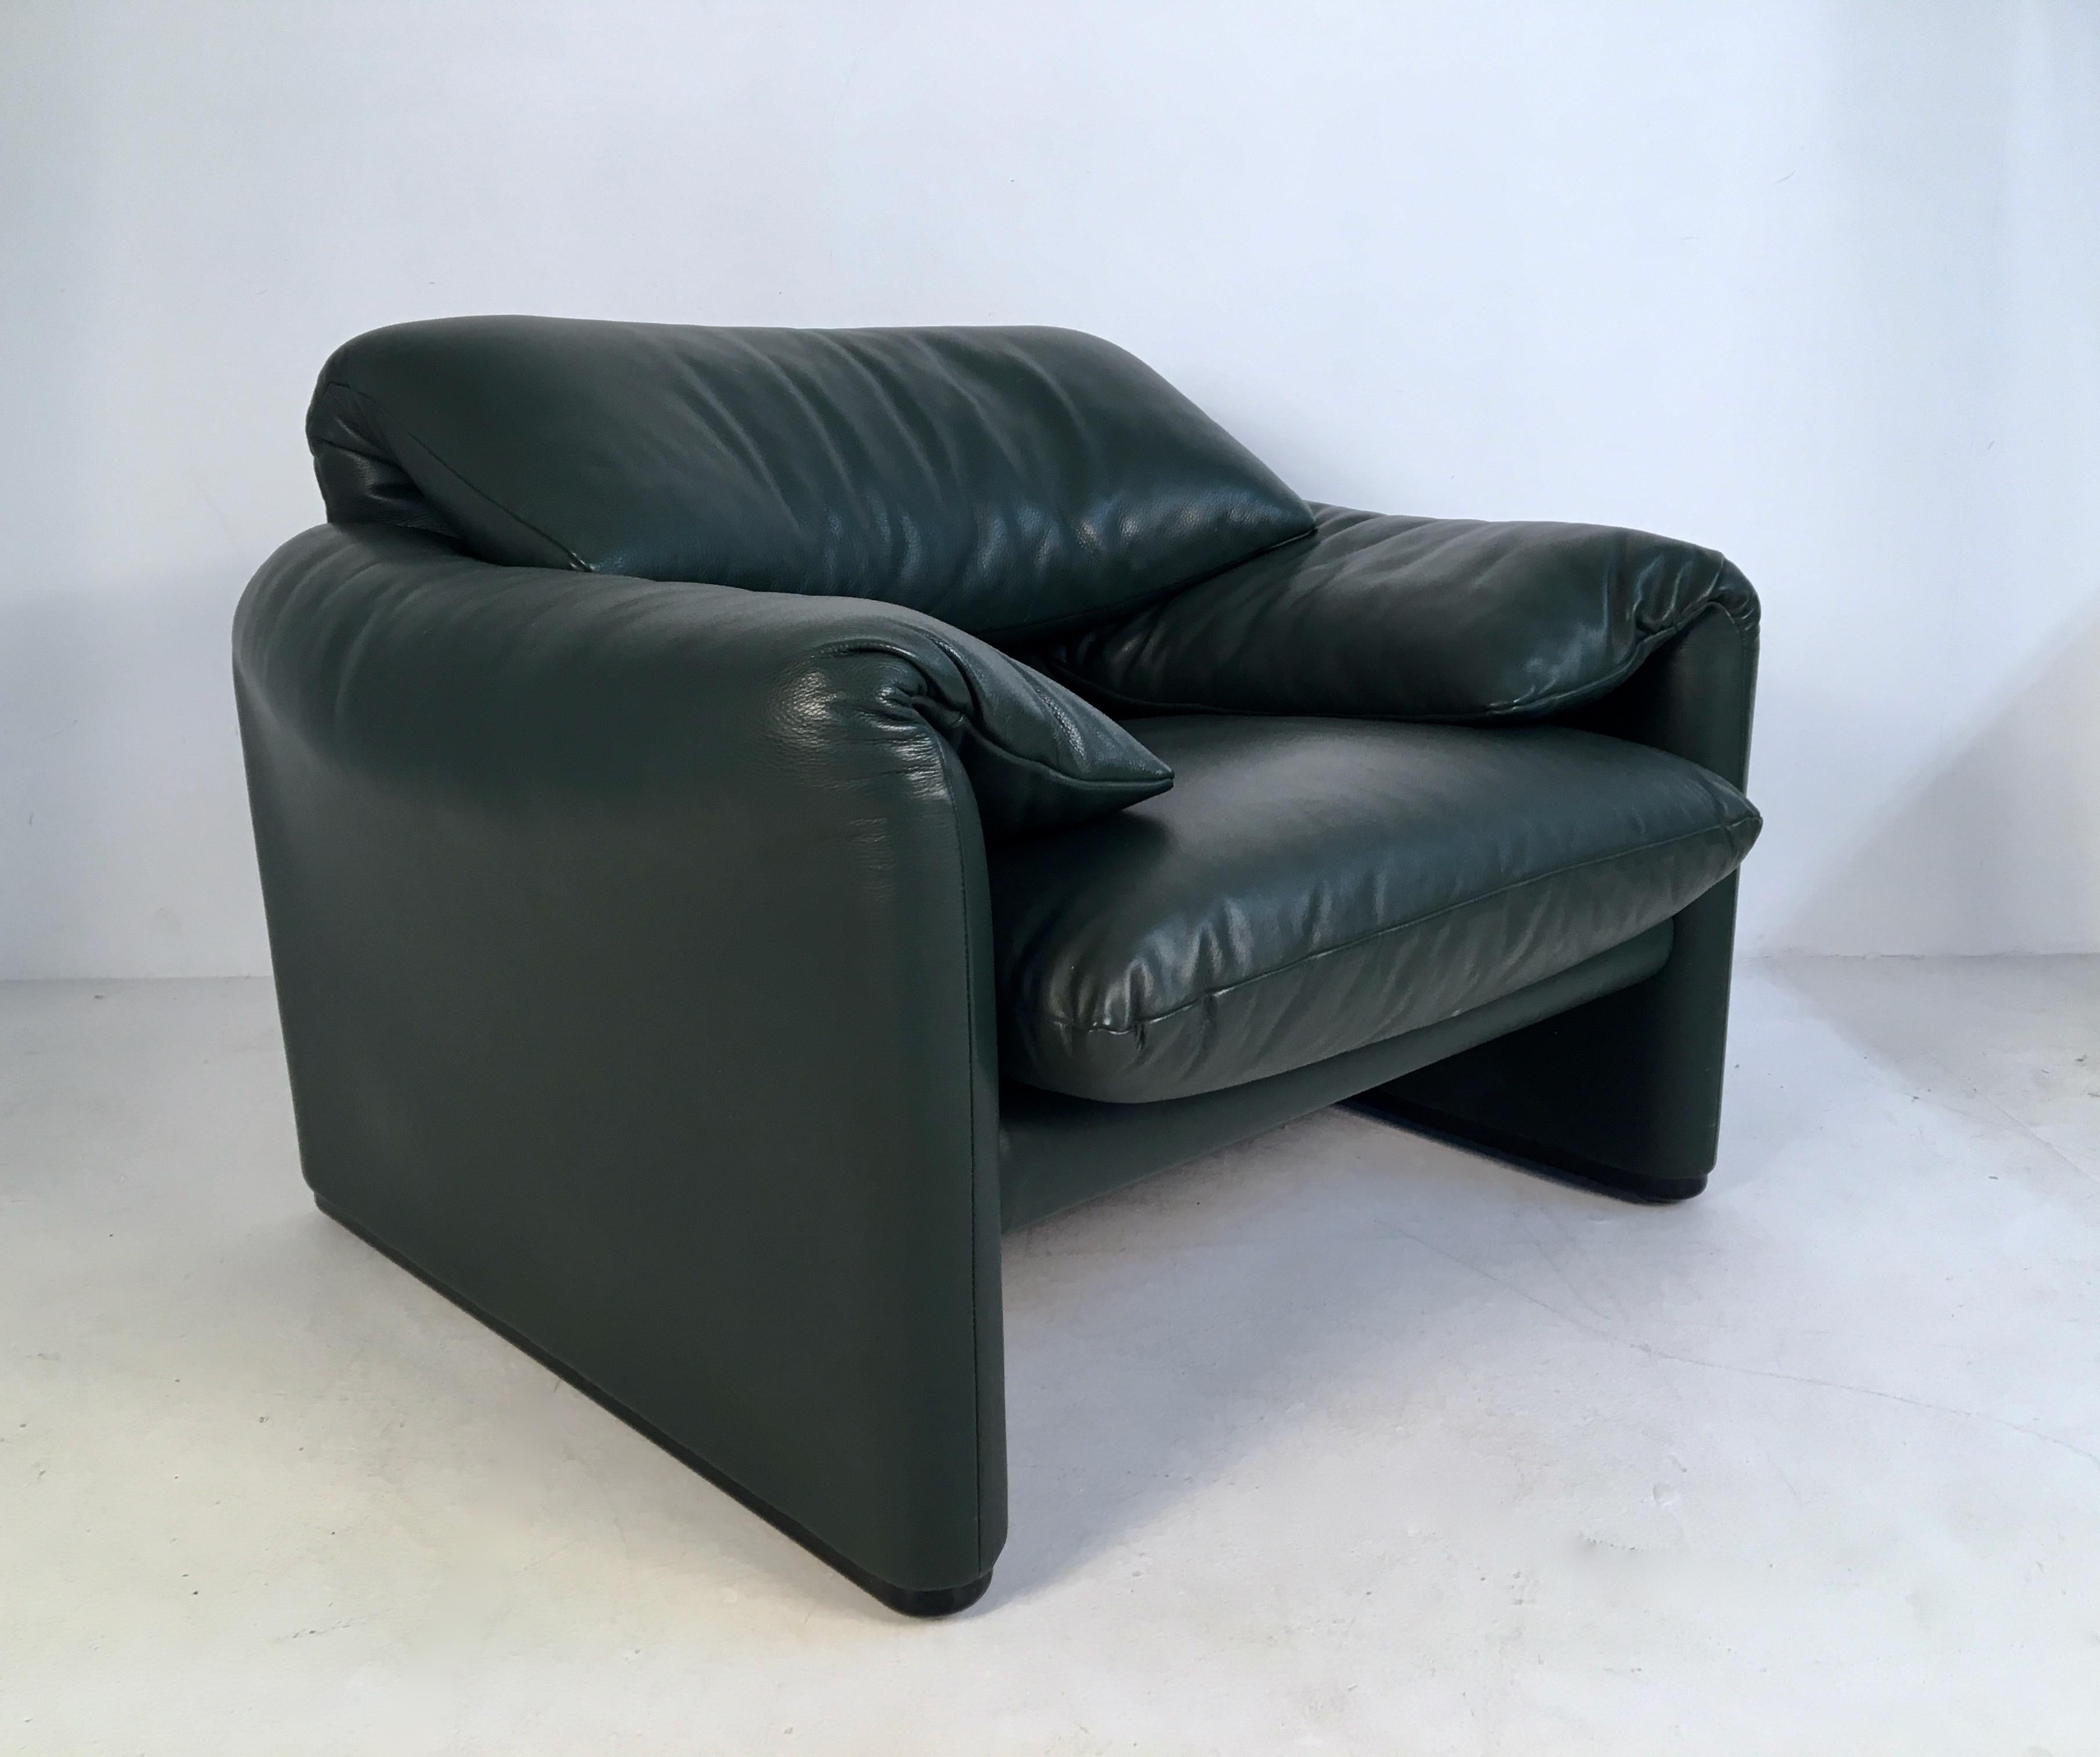 Modern Pair of Green Leather 'Maralunga' Lounge Chairs by Magistretti for Cassina